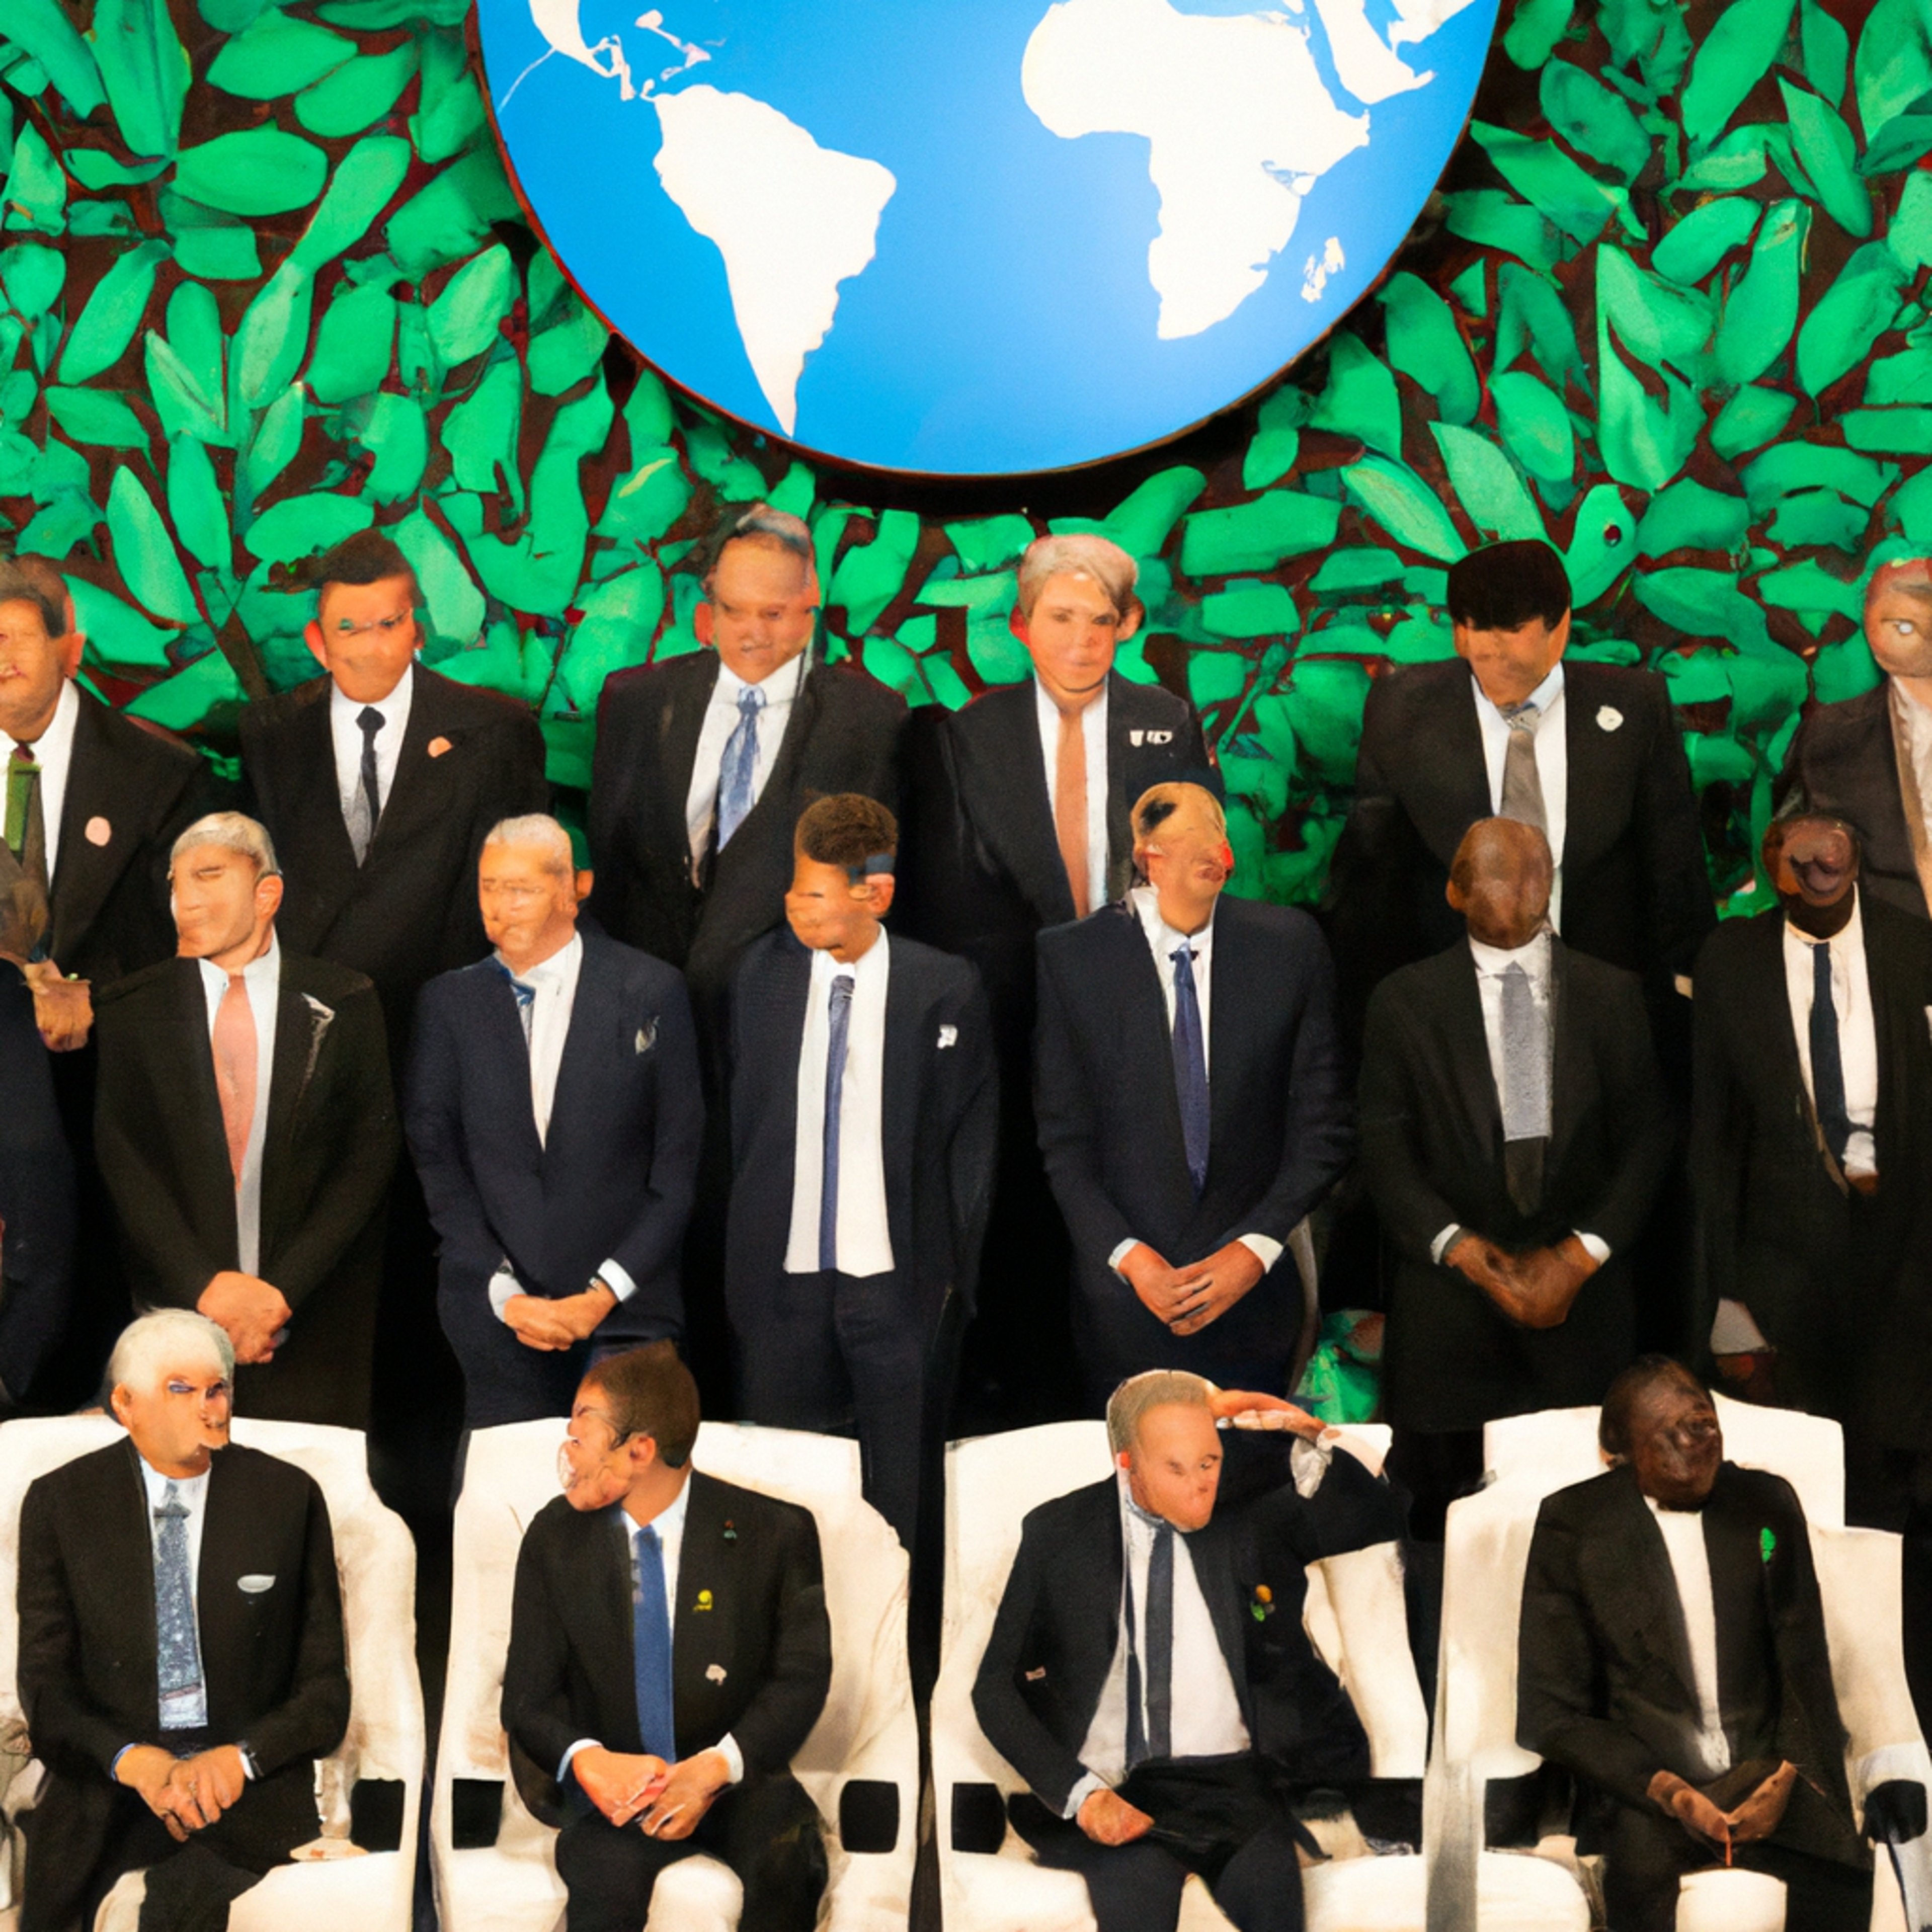 World Leaders Gather to Discuss Climate Change Solutions